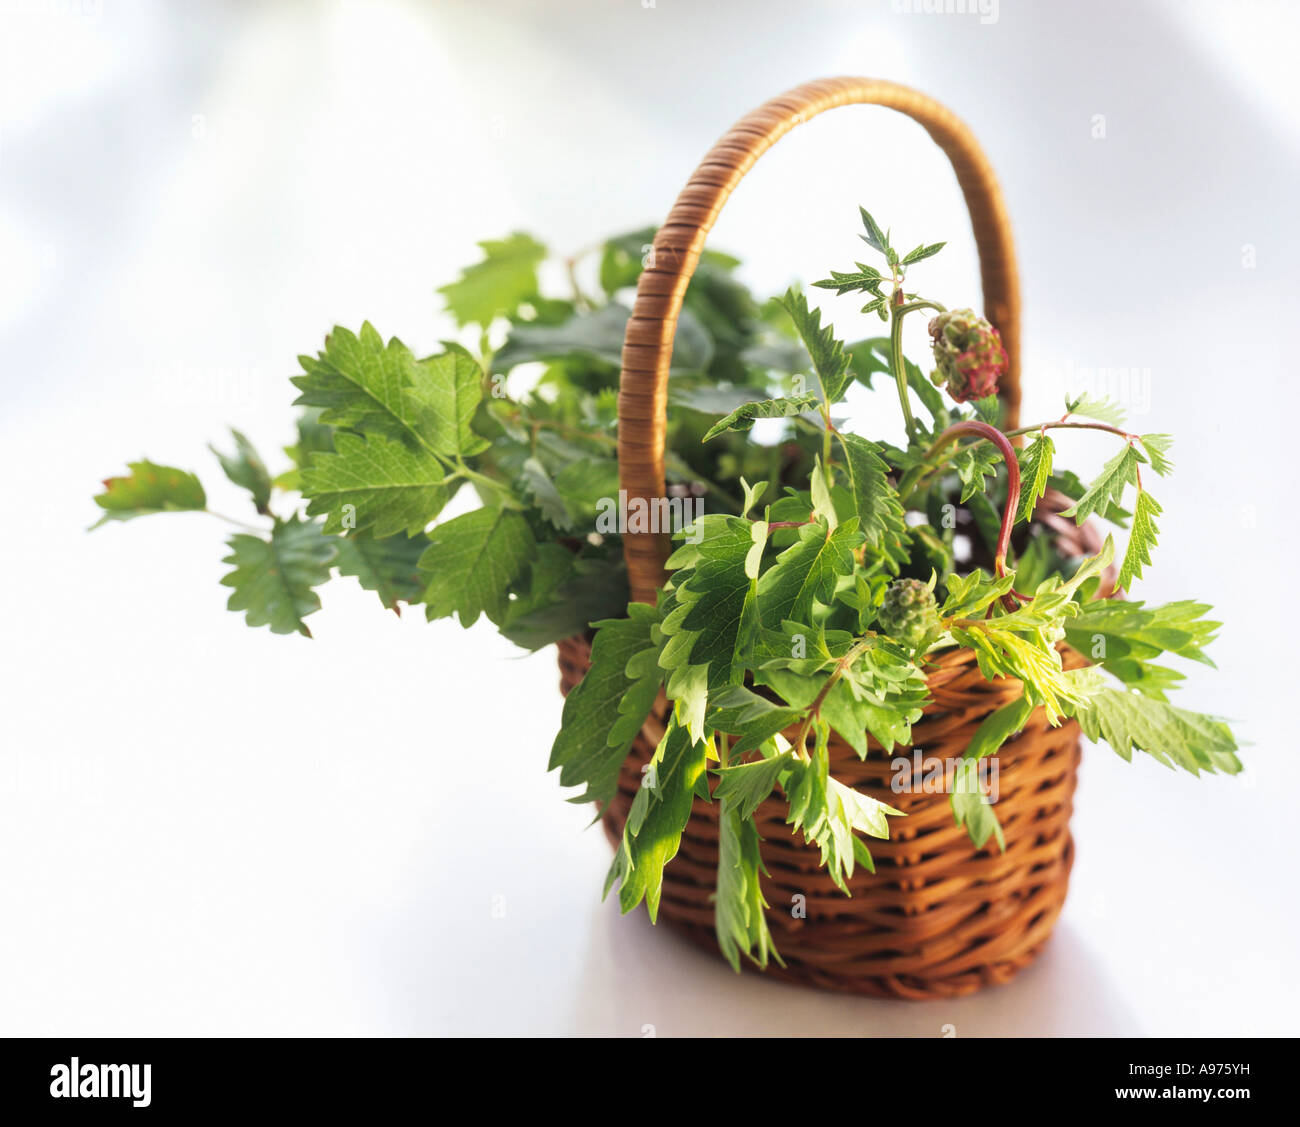 A Basket of Pimpinella FoodCollection Stock Photo